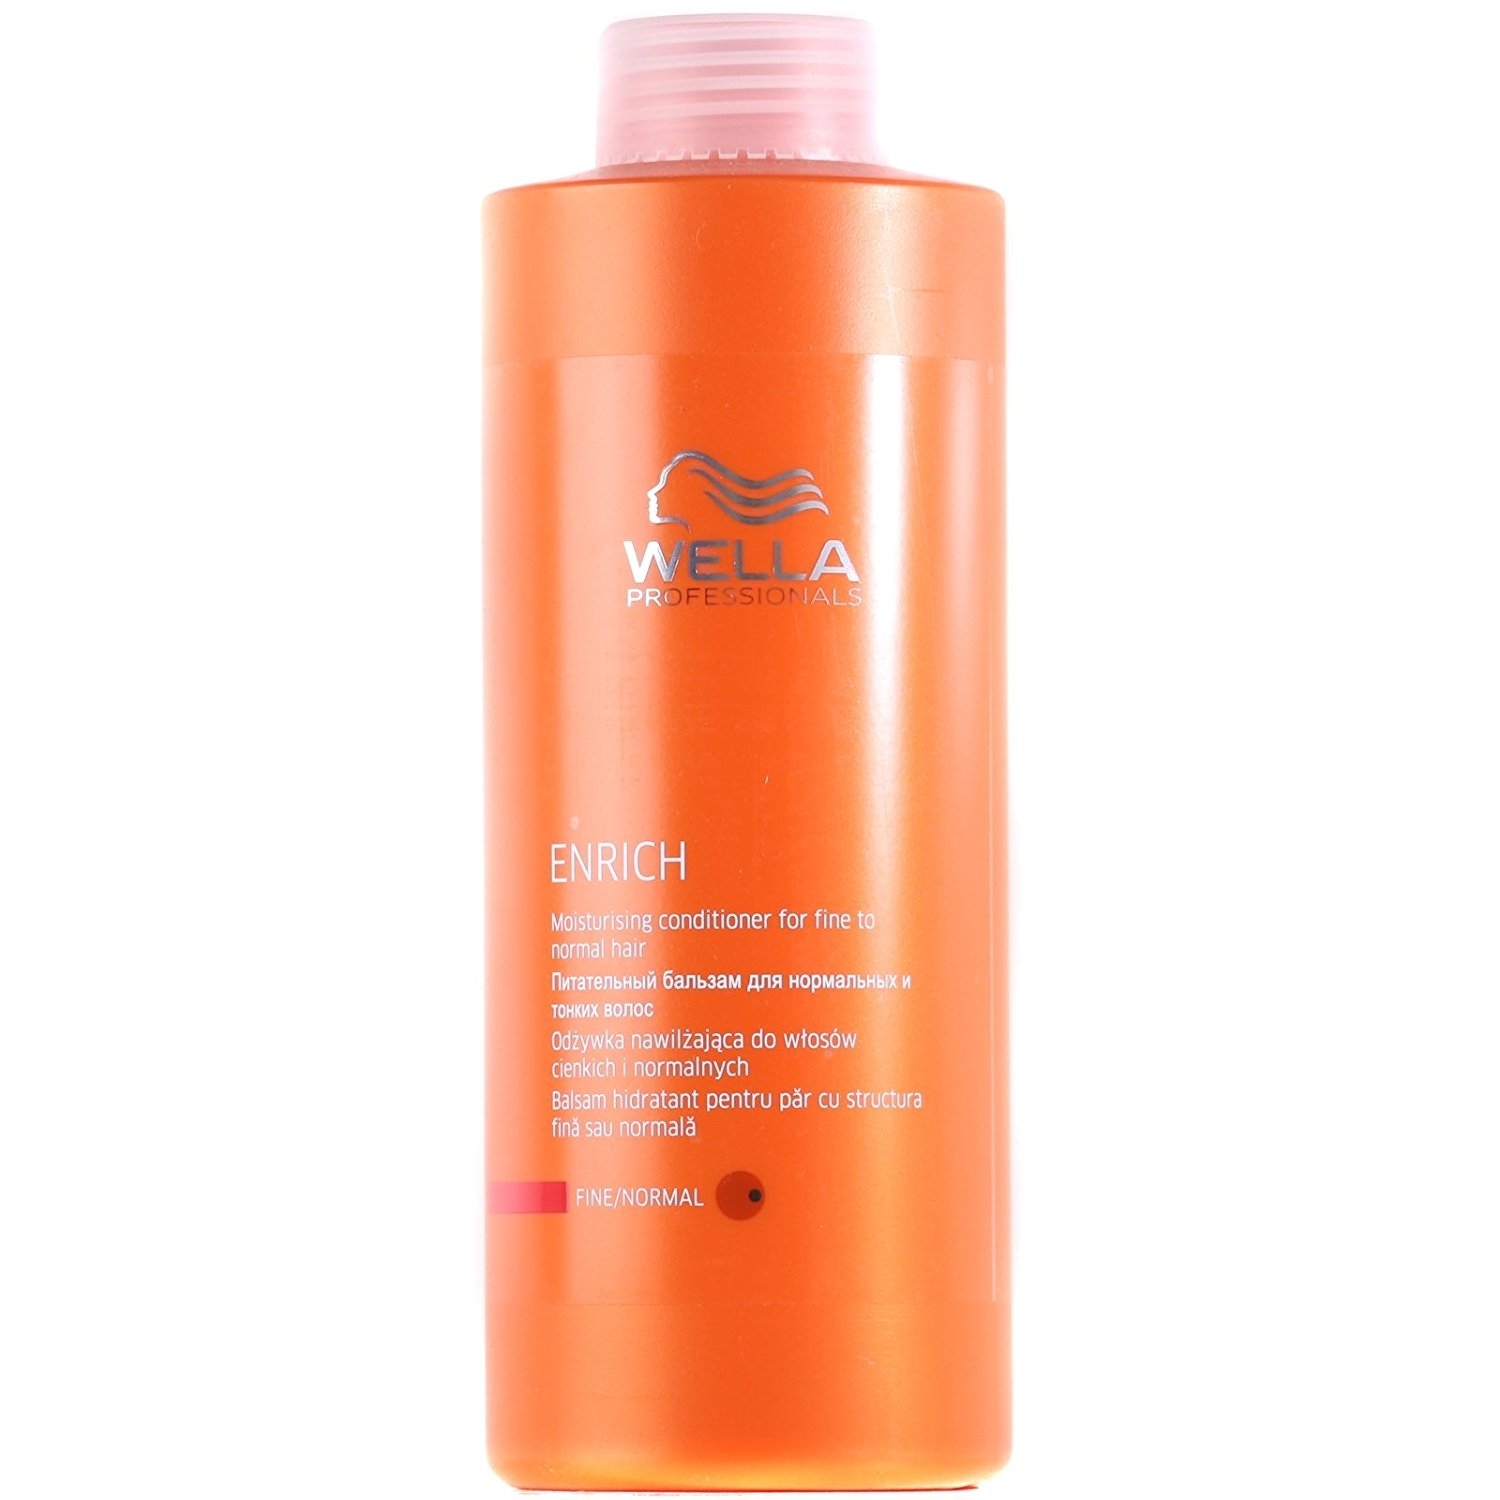 Wella professionals Enrich Moisturizing Conditioner for Fine Hair from  